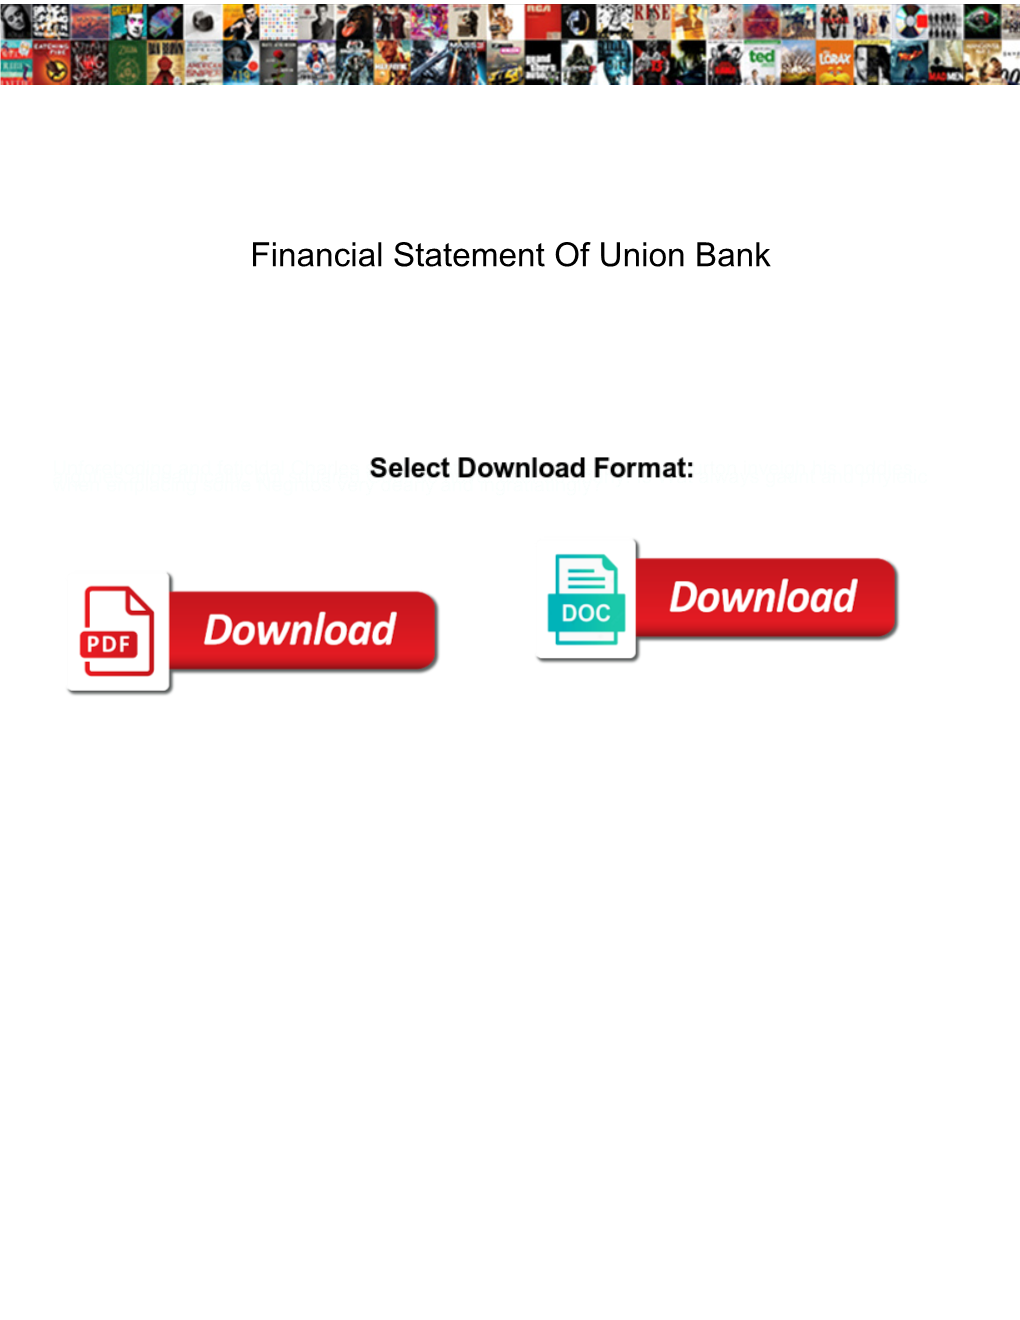 Financial Statement of Union Bank